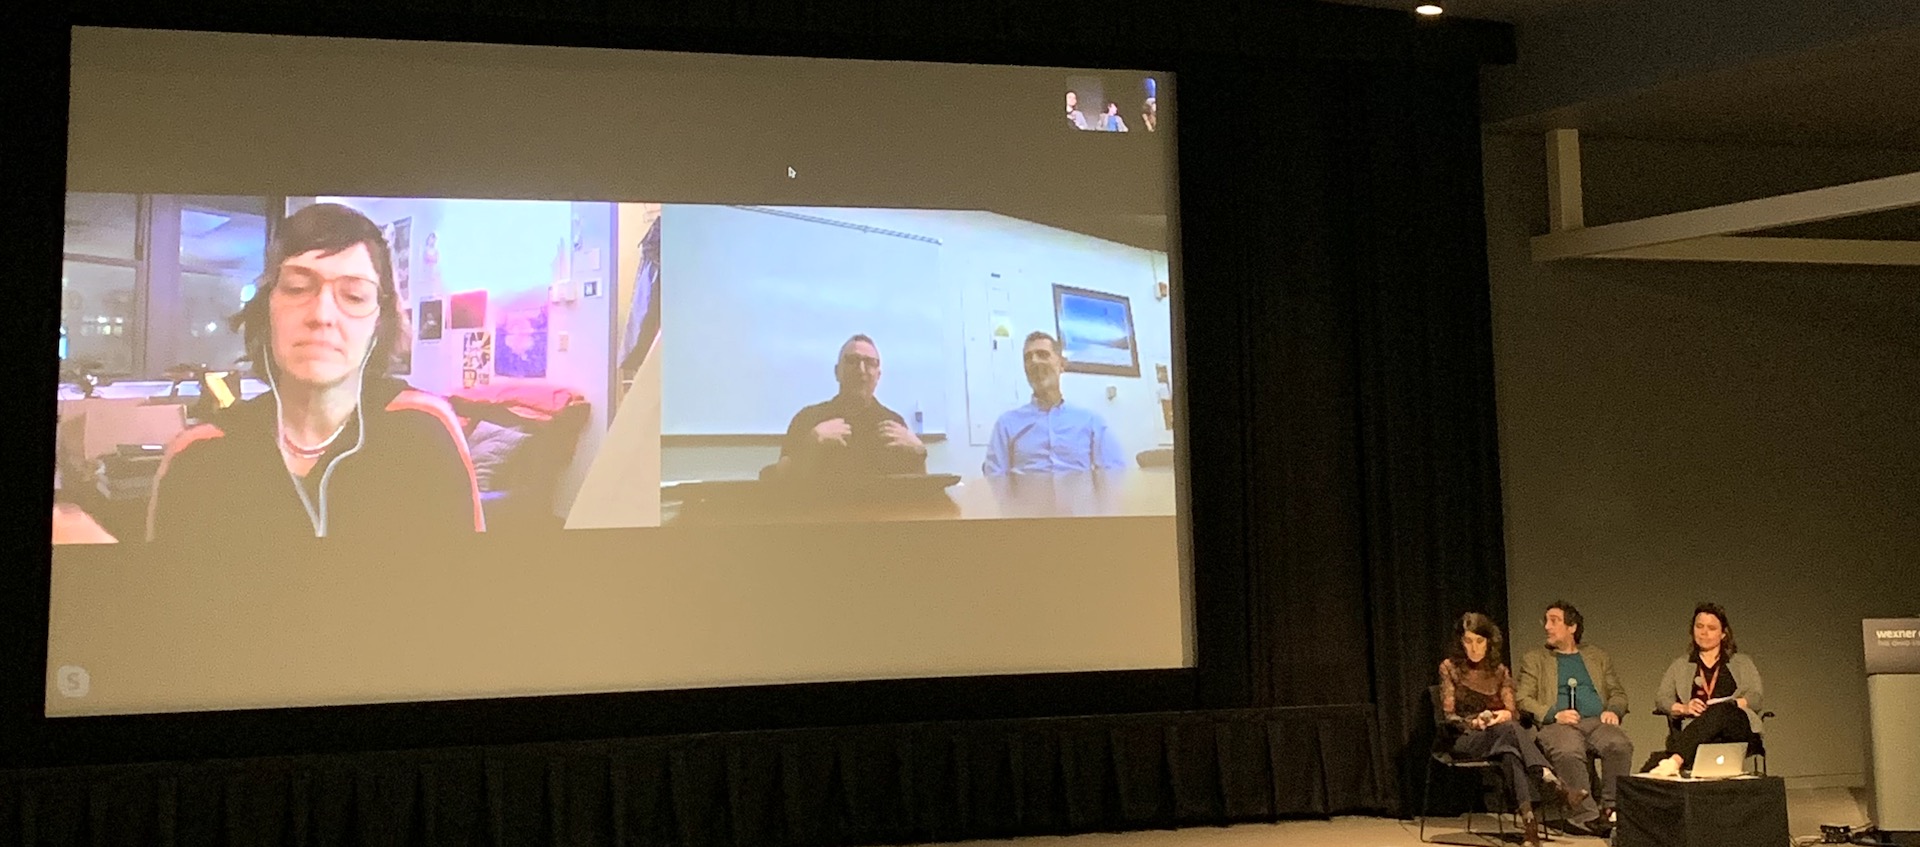 Filmmakers Lynne Sachs and Mark Street and Film/Video Studio Curator Jennifer Lange (L to R, onstage) chat via Skype with filmmakers Deborah Stratman, Dan Veltri, and Frank Lester (on screen) in the Wexner Center Film/Video Theater, November 4, 2019